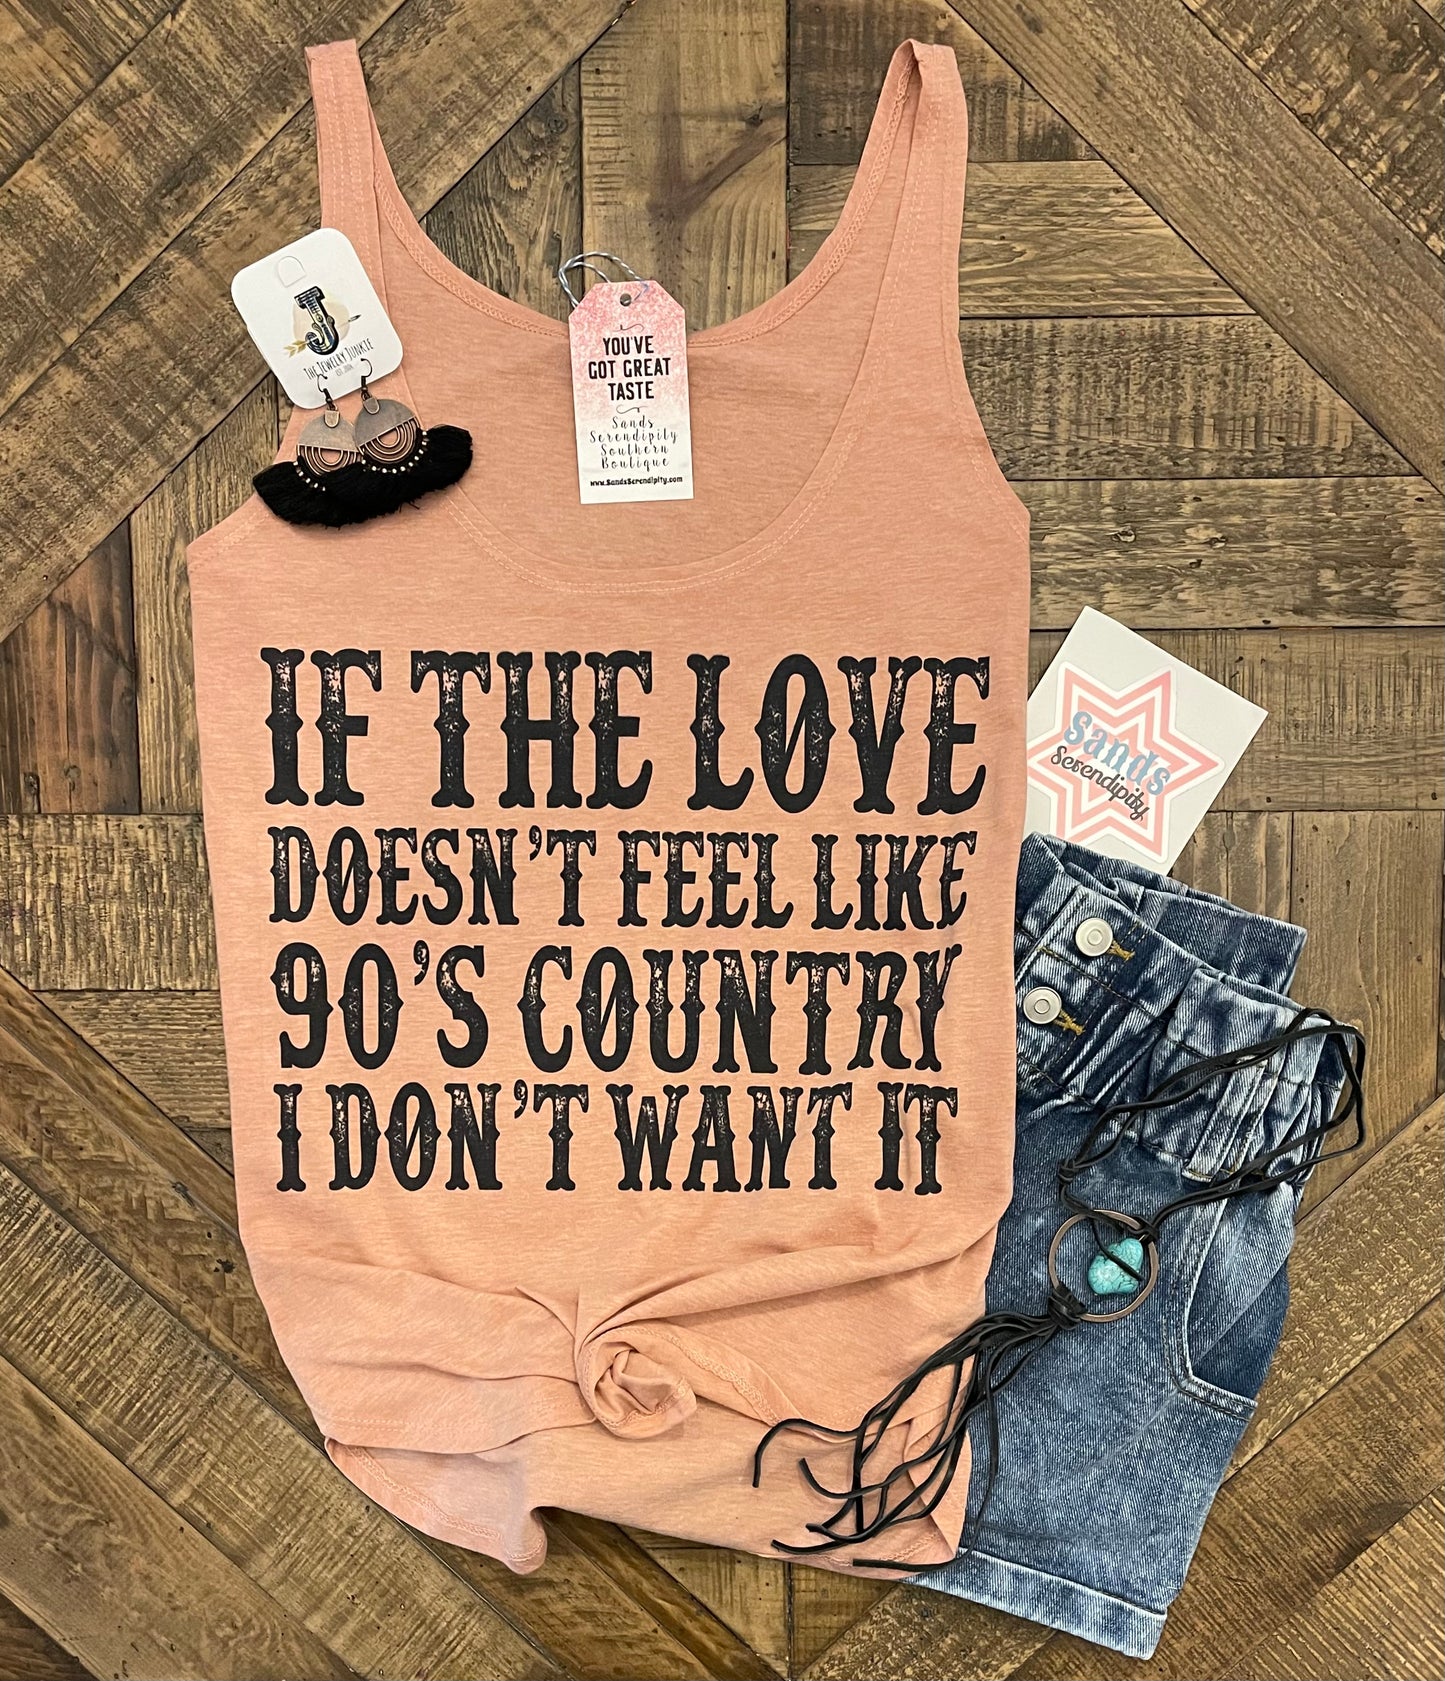 If The Love Doesn’t Feel Like 90s Country I Don’t Want It 💗 - Sands Serendipity Boutique